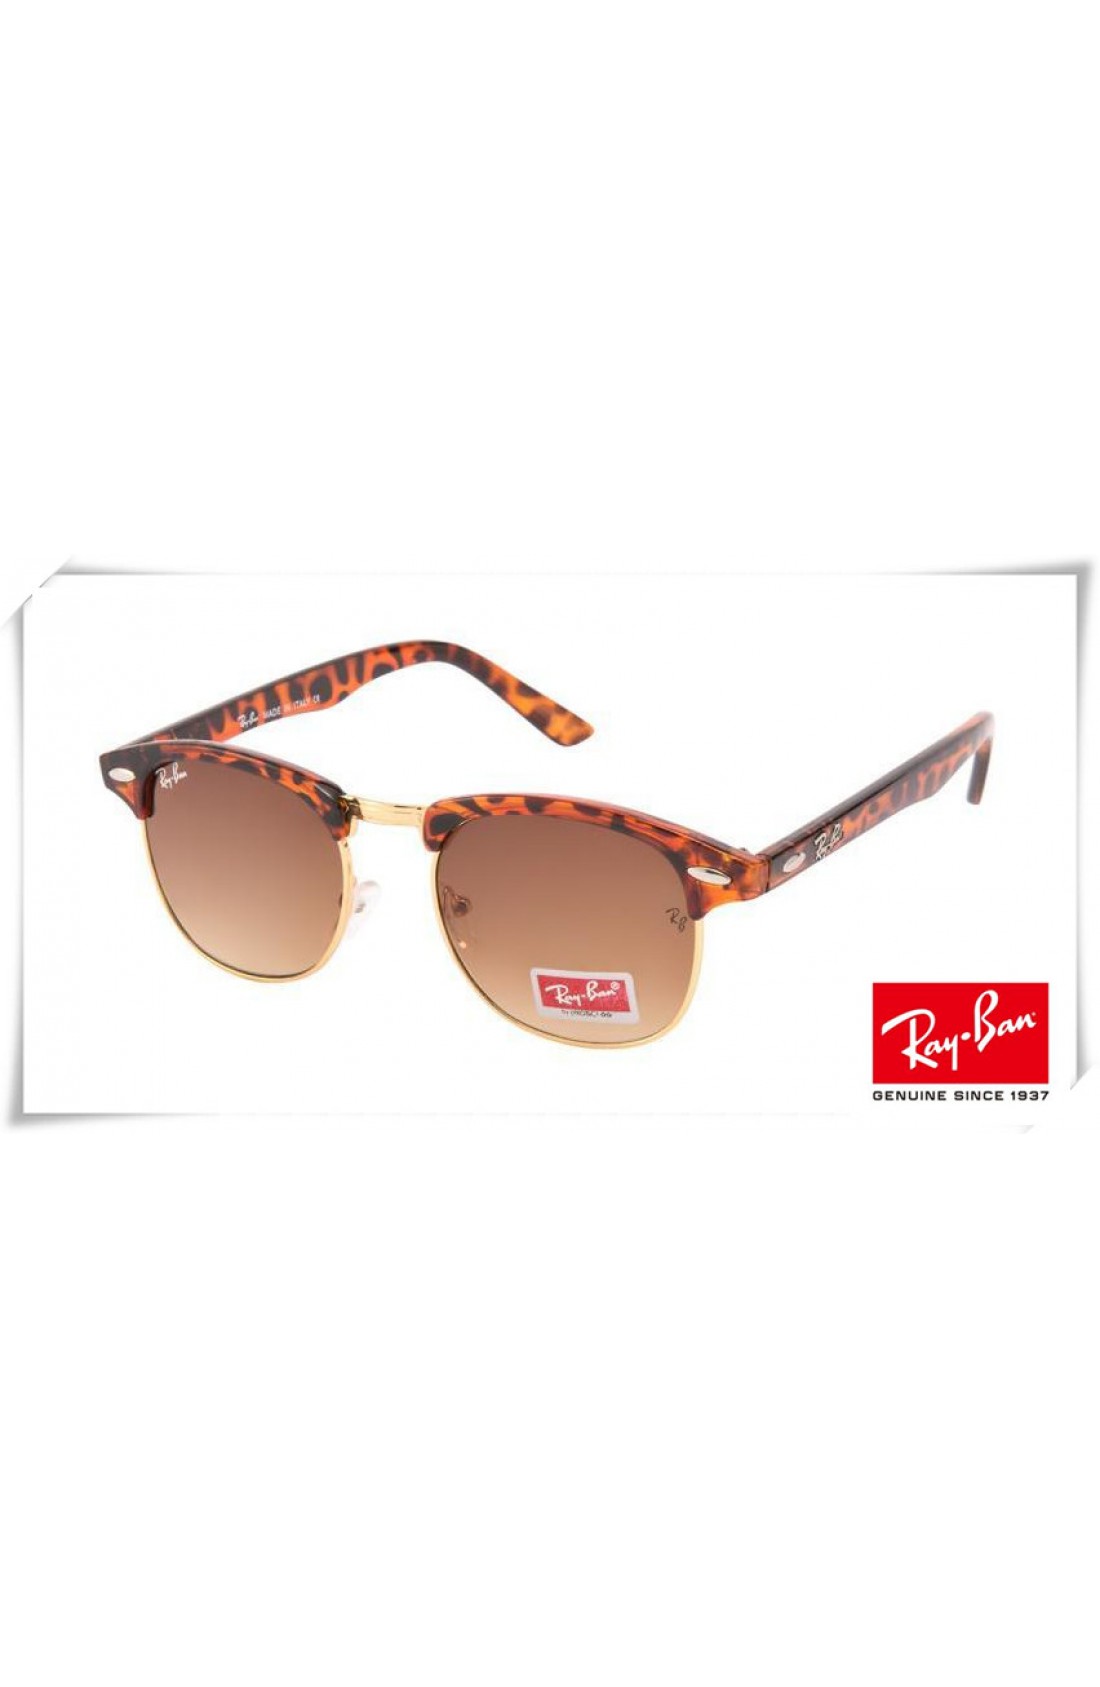 ray ban sunglasses red frame